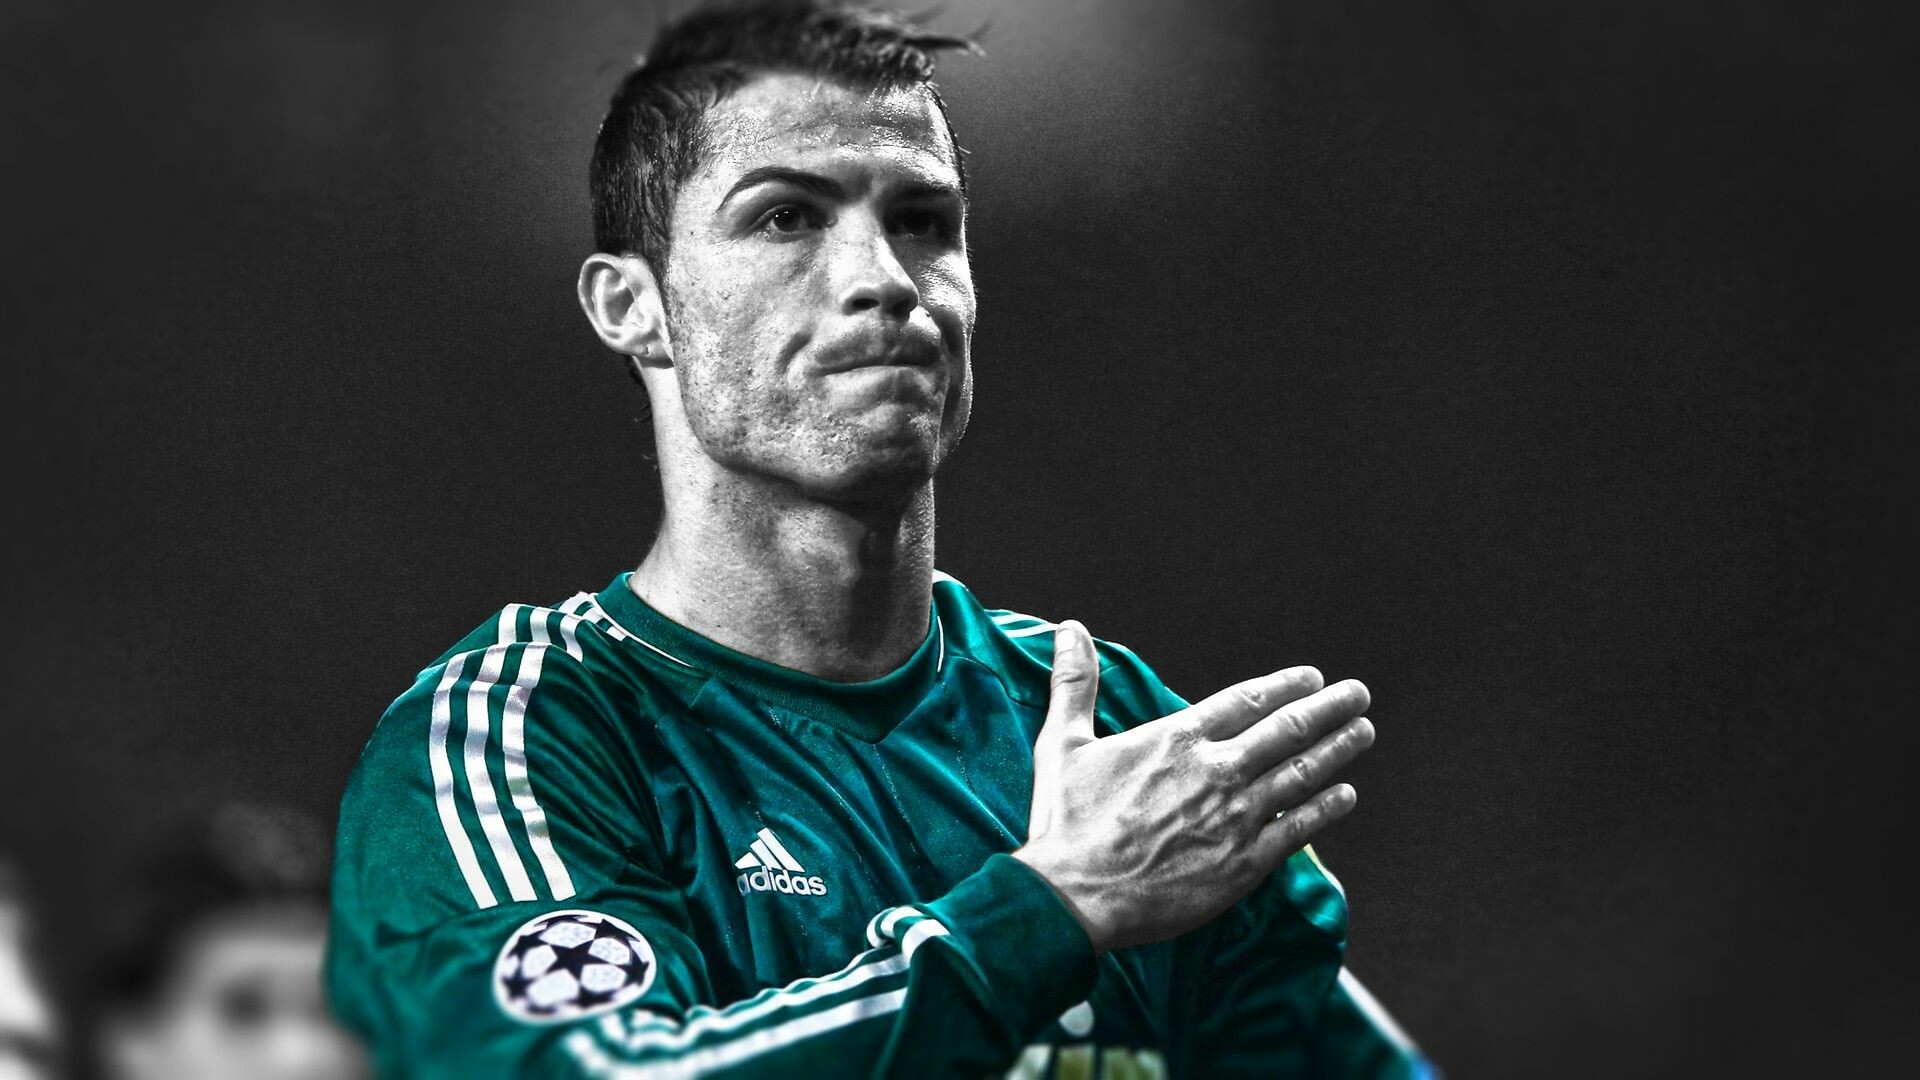 49 Cristiano Ronaldo Cool Wallpapers Hd 4k 5k For Pc And Mobile Download Free Images For Iphone Android